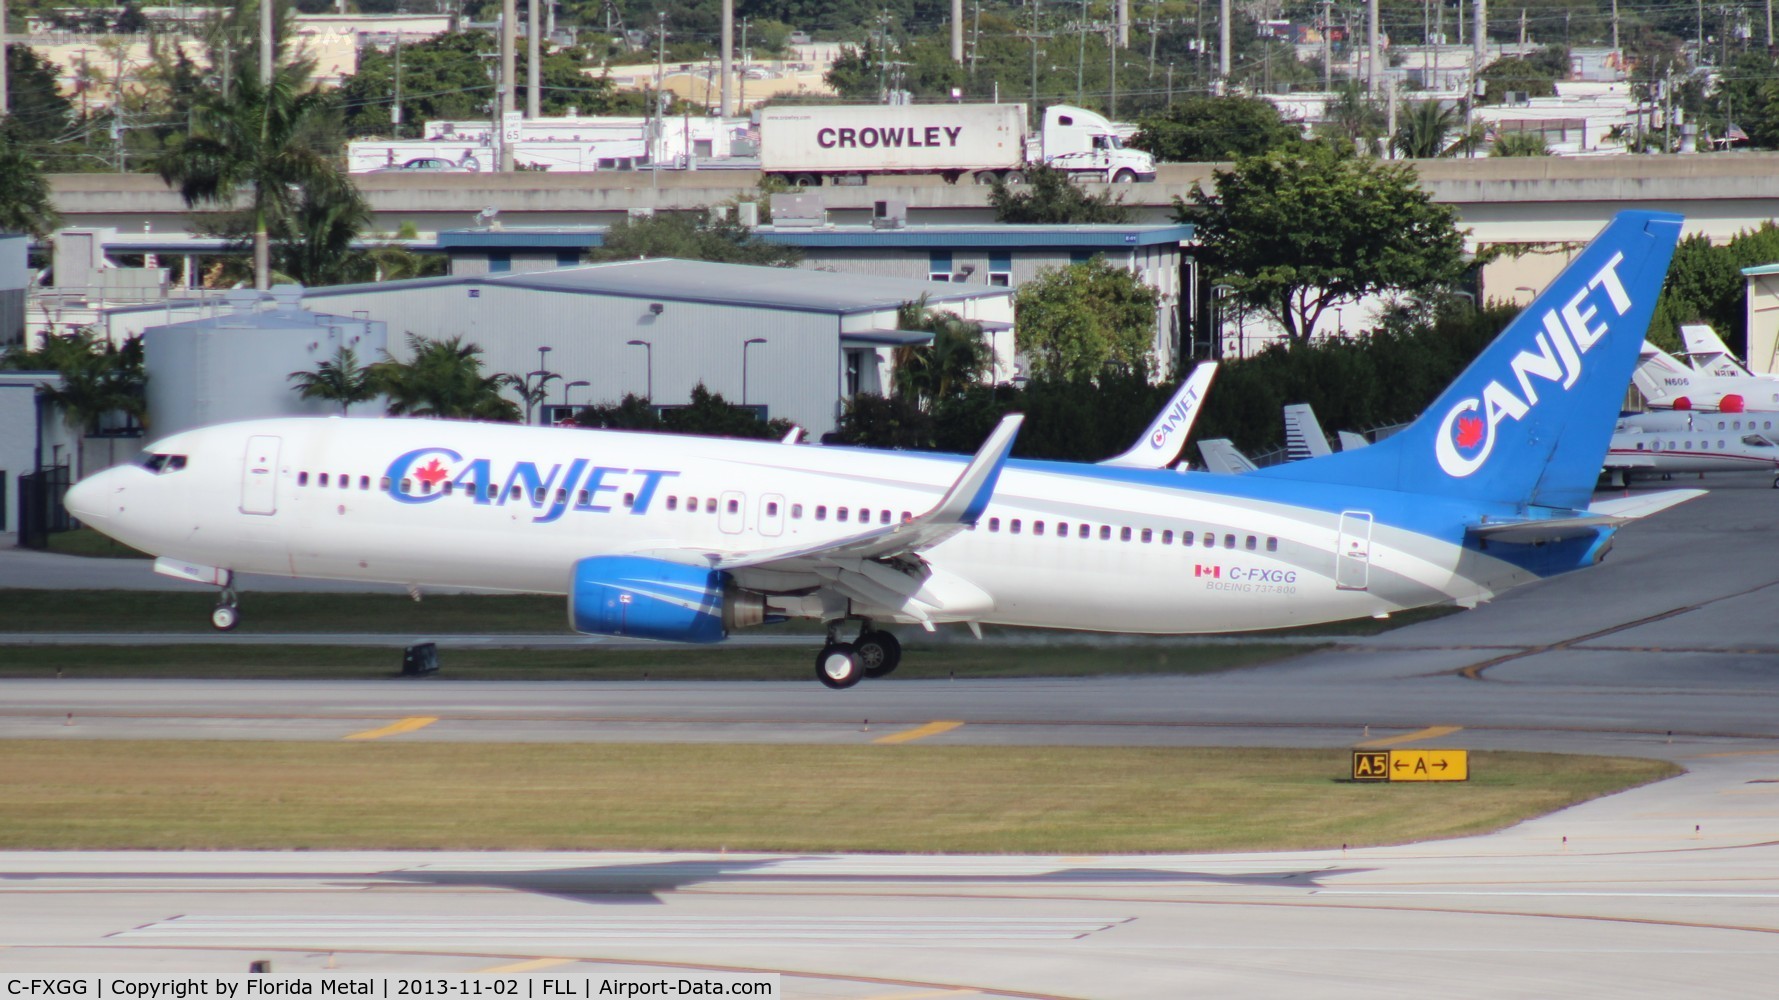 C-FXGG, 2000 Boeing 737-81Q C/N 29051, Can Jet 737-800